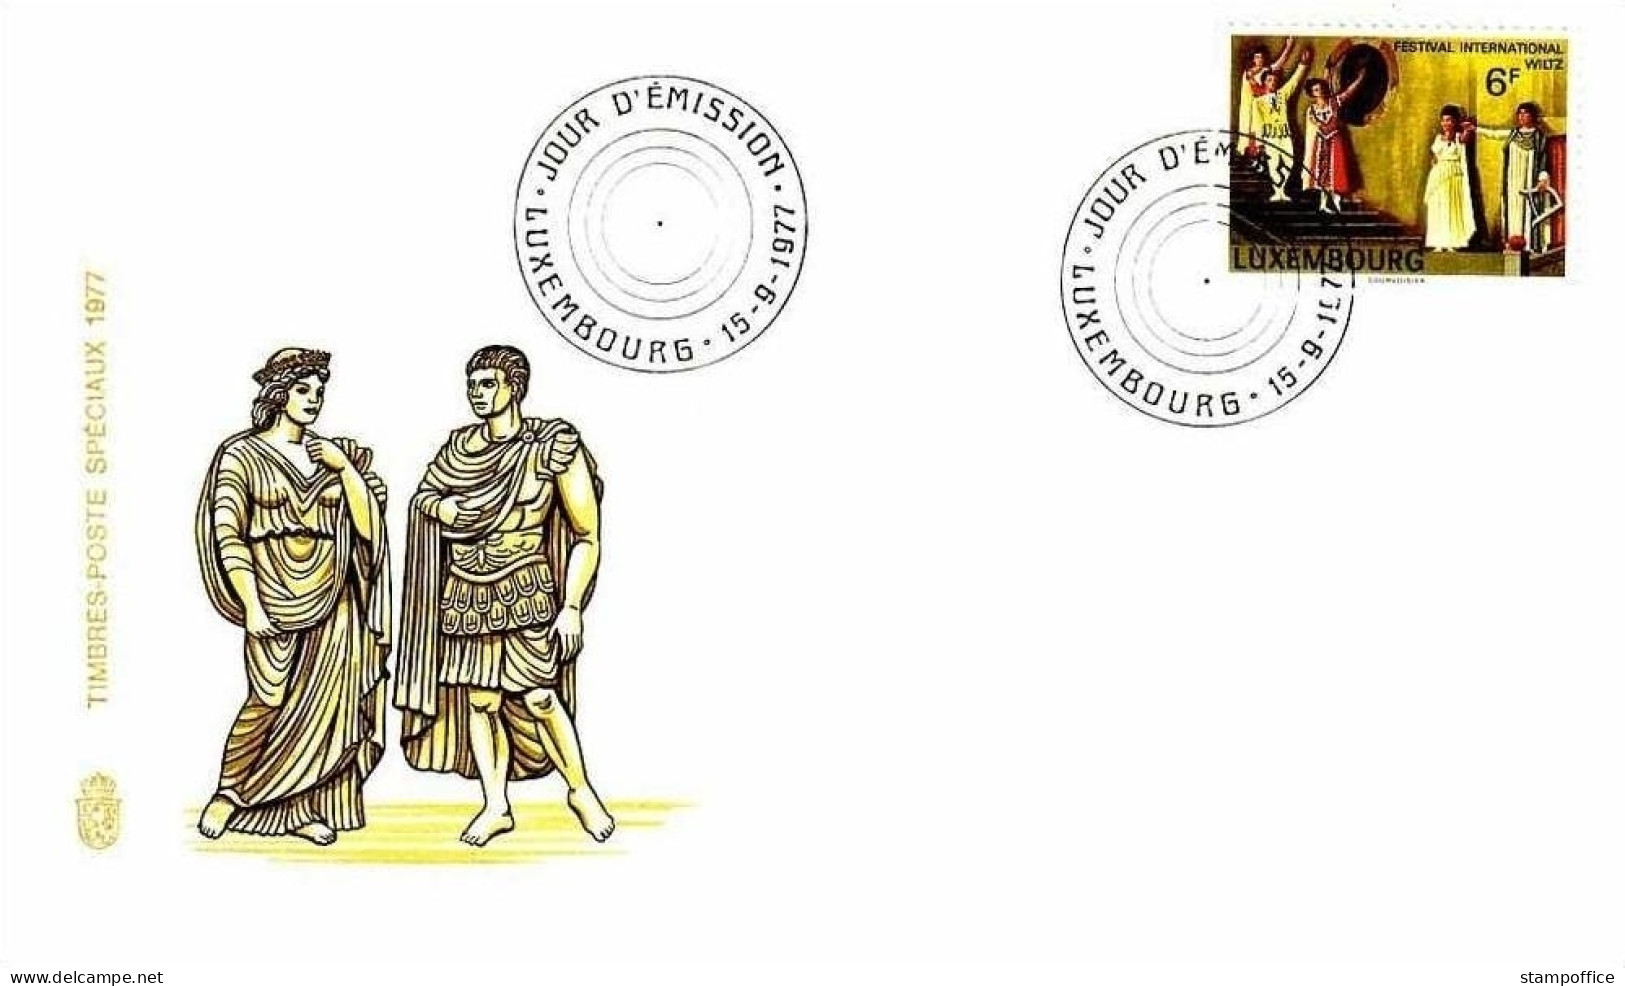 LUXEMBOURG MI-NR. 955 FDC THEATER FESTSPIELE 1977 - FDC